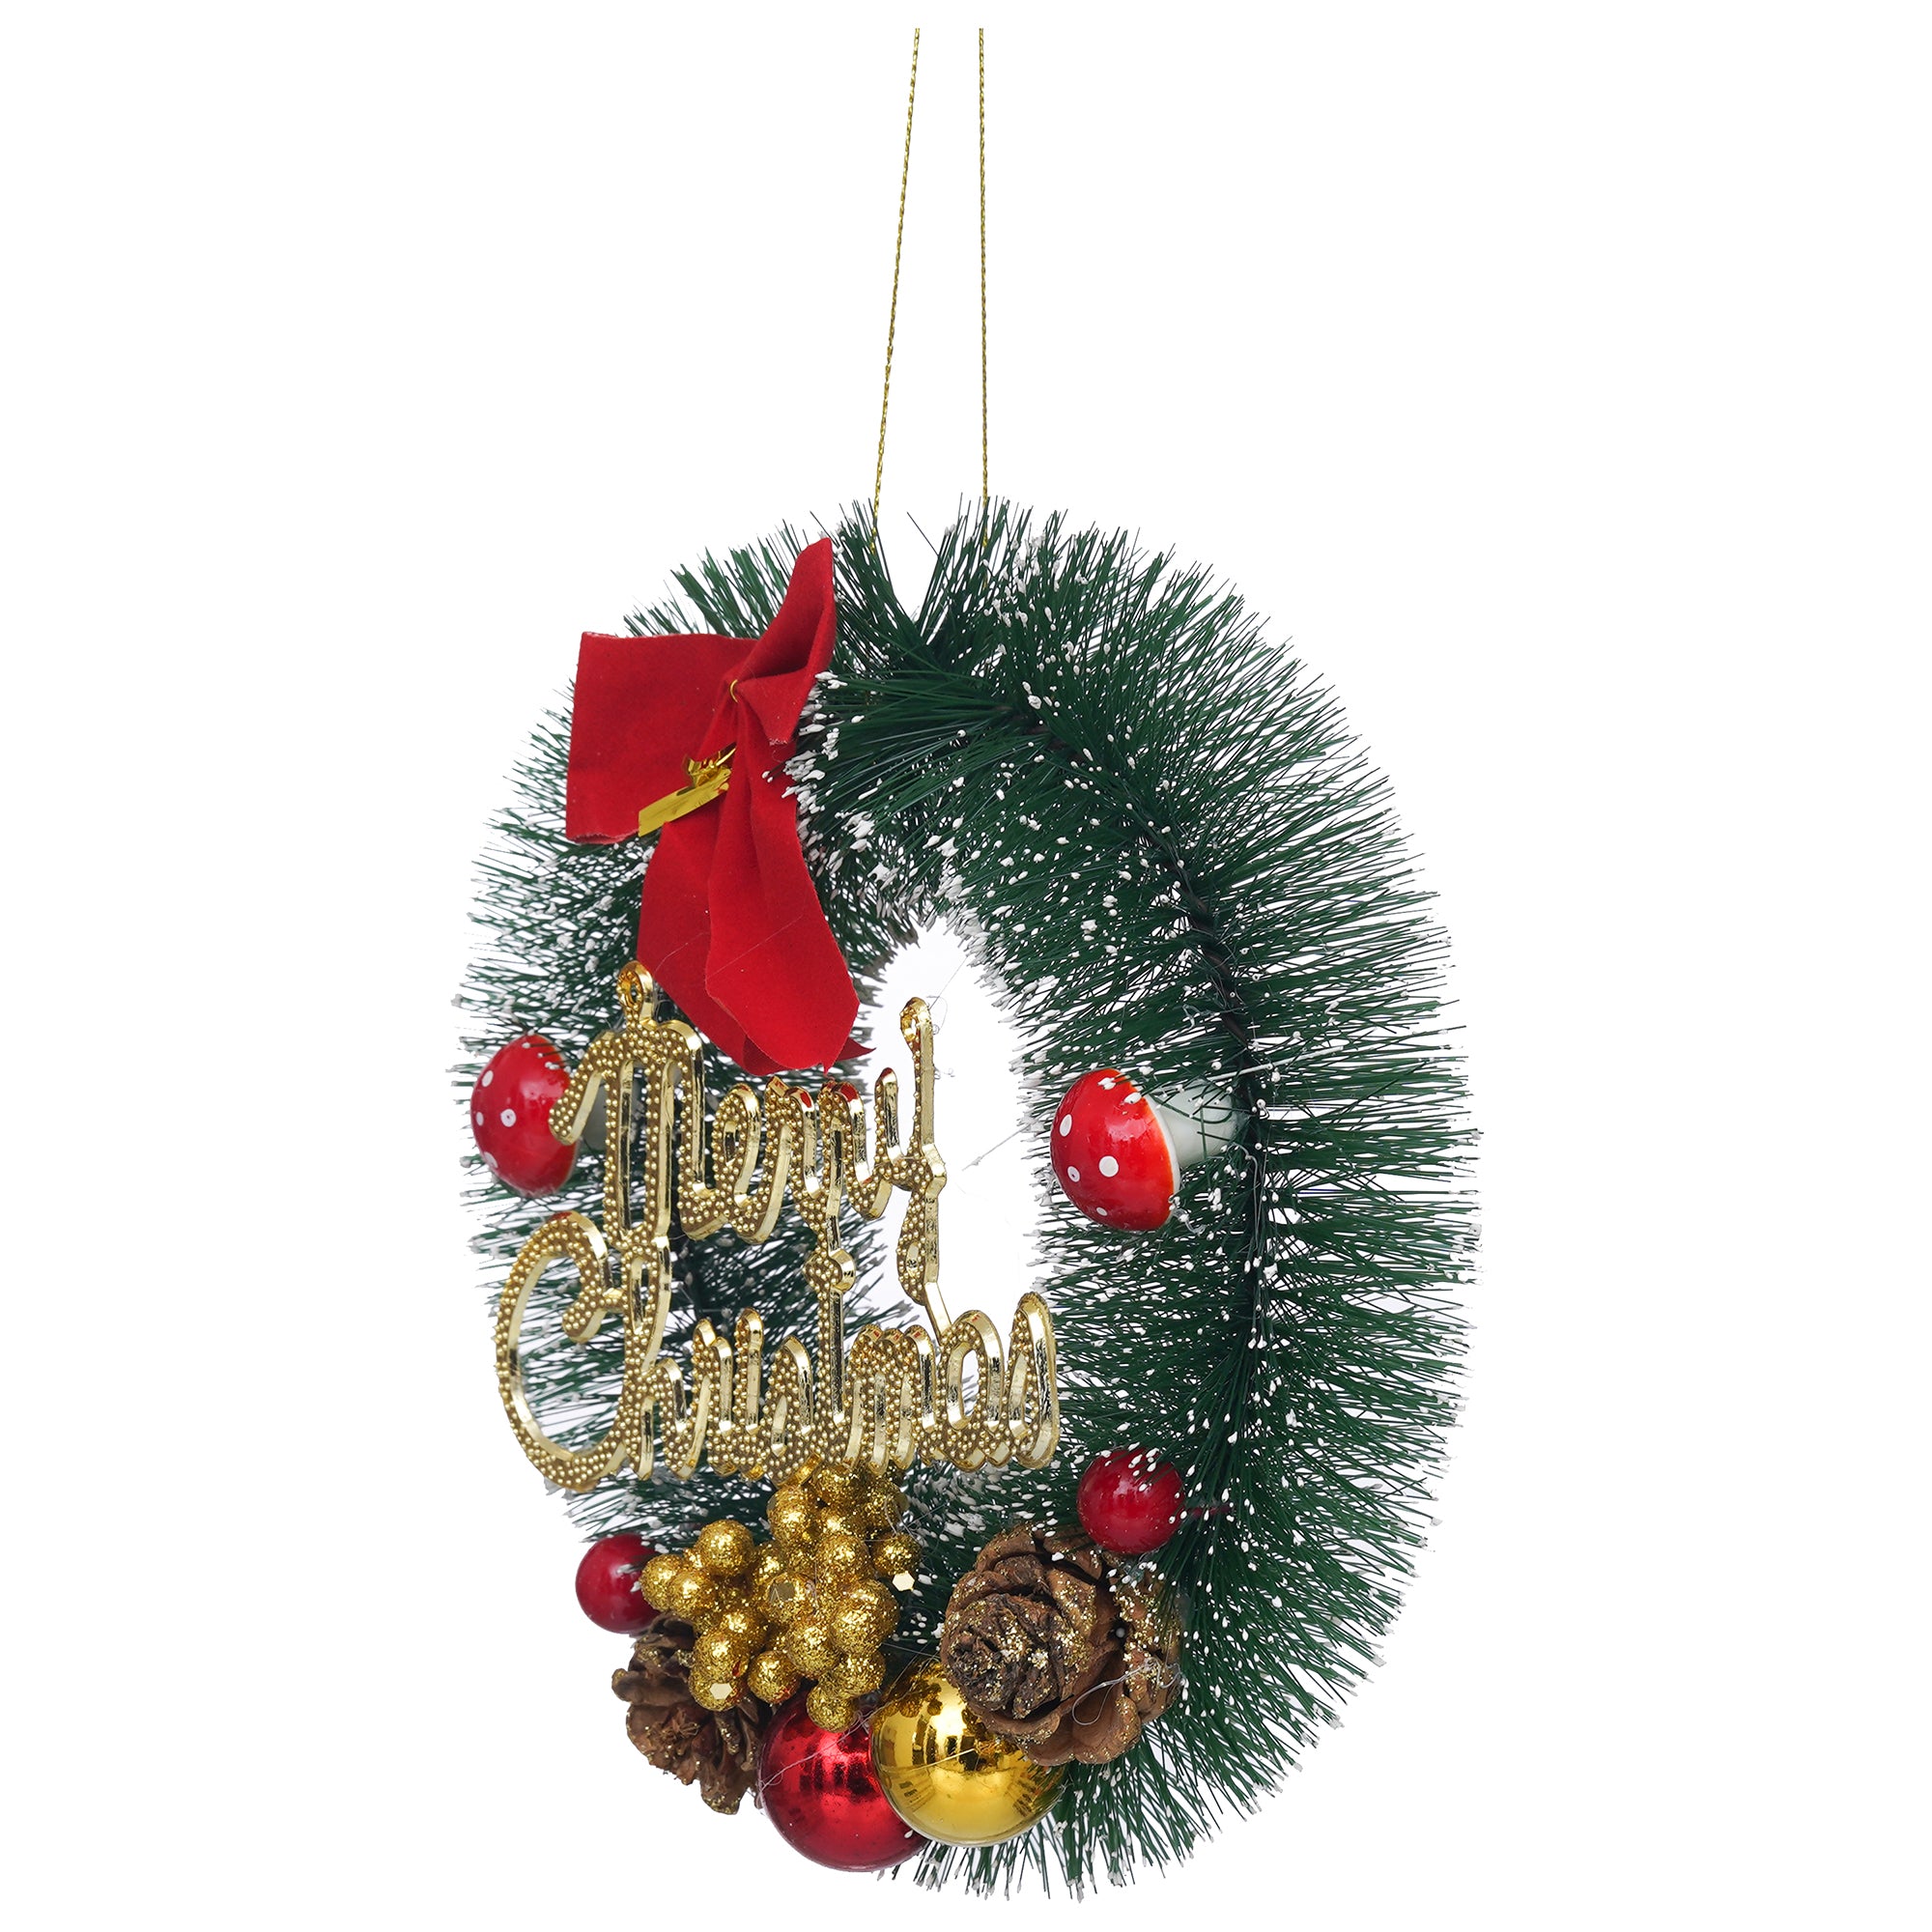 eCraftIndia Merry Christmas Wreath With Berries, Balls, Flowers, Ribbon  Christmas Front Door Ornament and Wall Decoration  Artificial Pine Garland for Xmas Party Decor 7